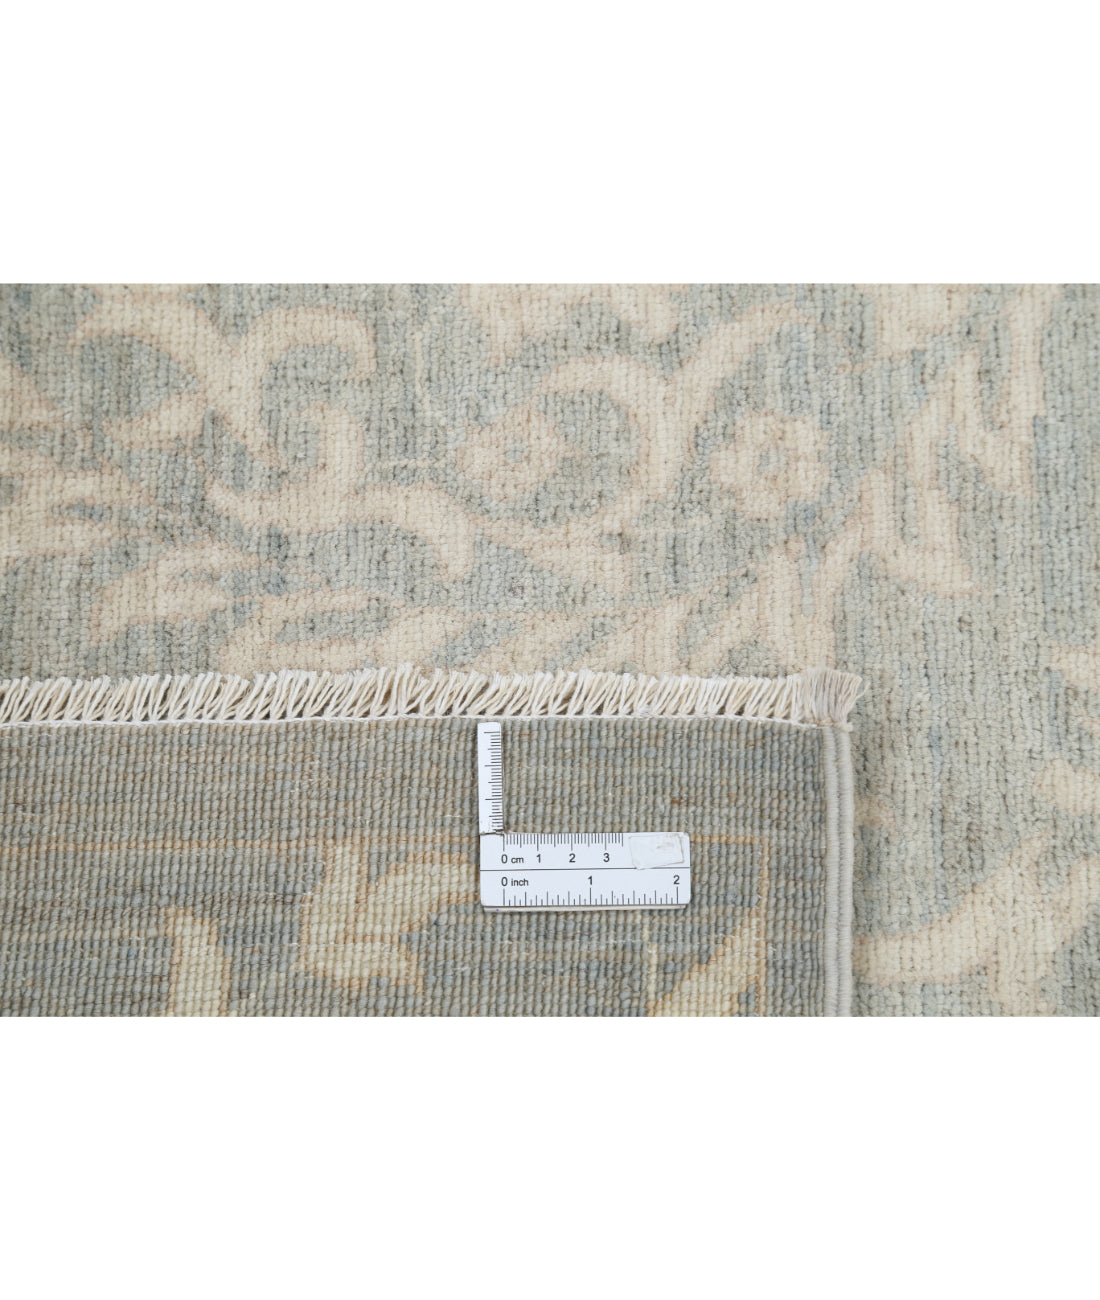 Hand Knotted Artemix Wool Rug - 6'0'' x 8'8'' 6'0'' x 8'8'' (180 X 260) / Blue / Ivory